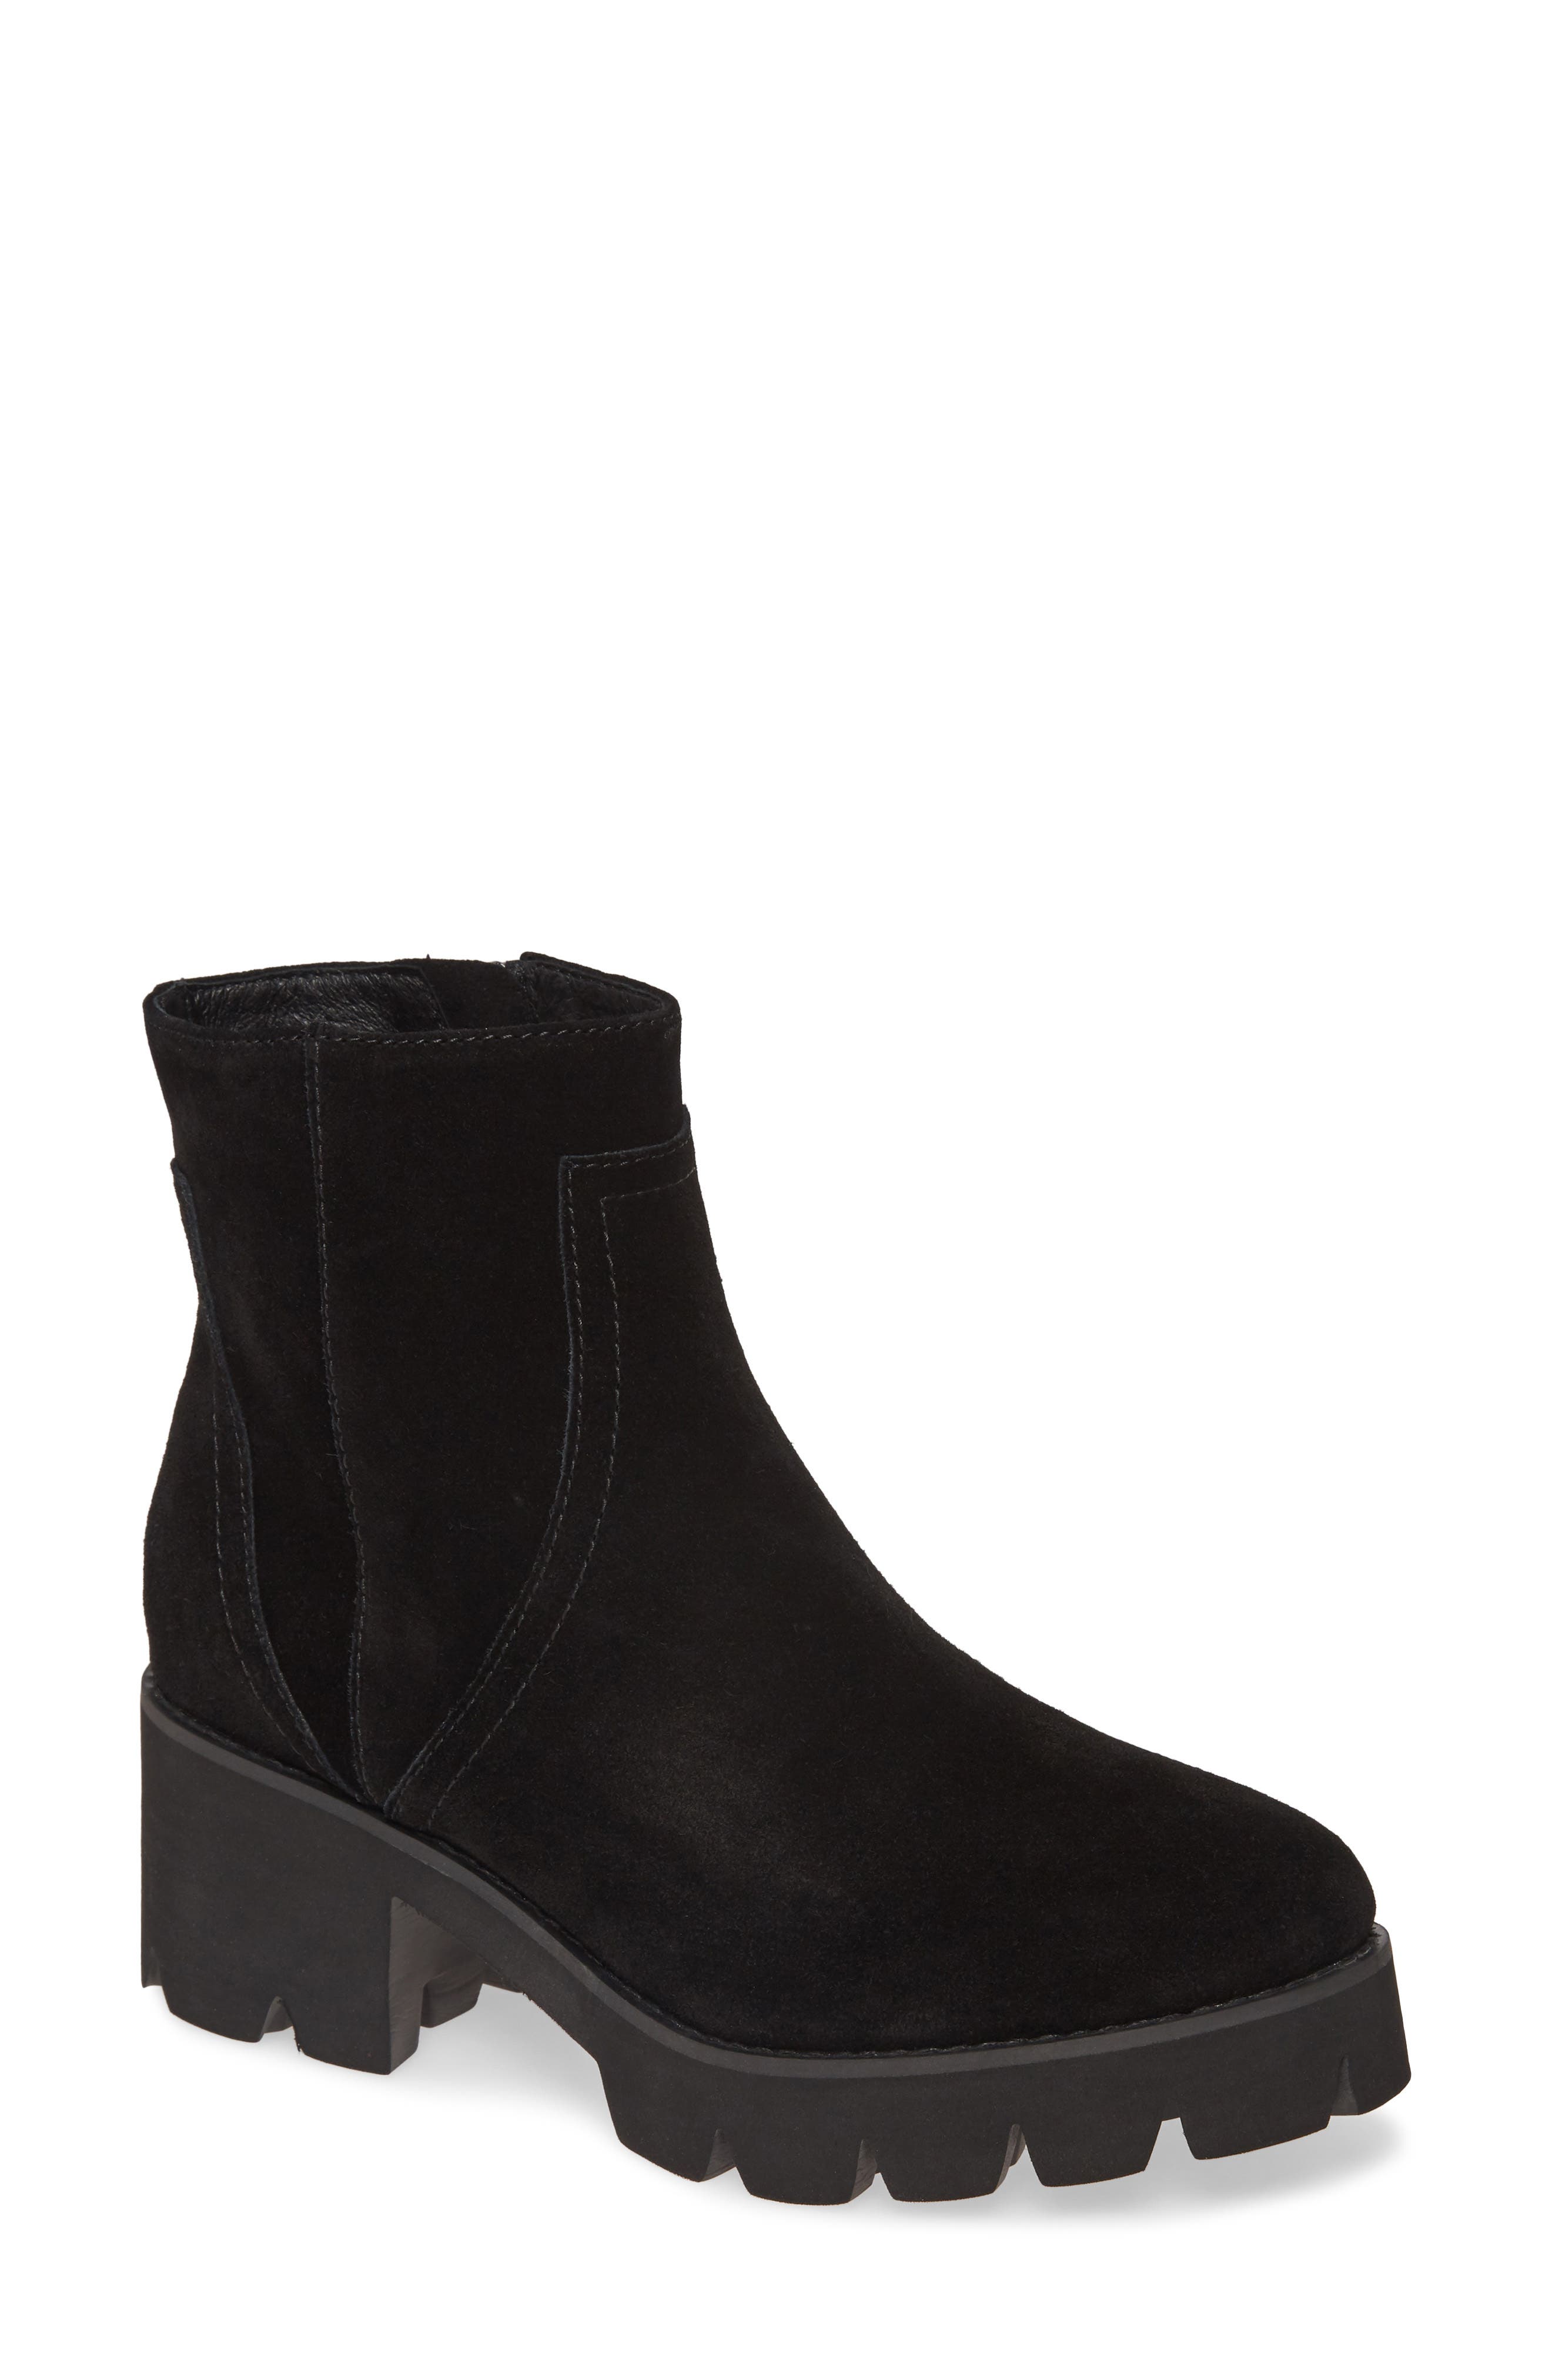 seychelles boots nordstrom